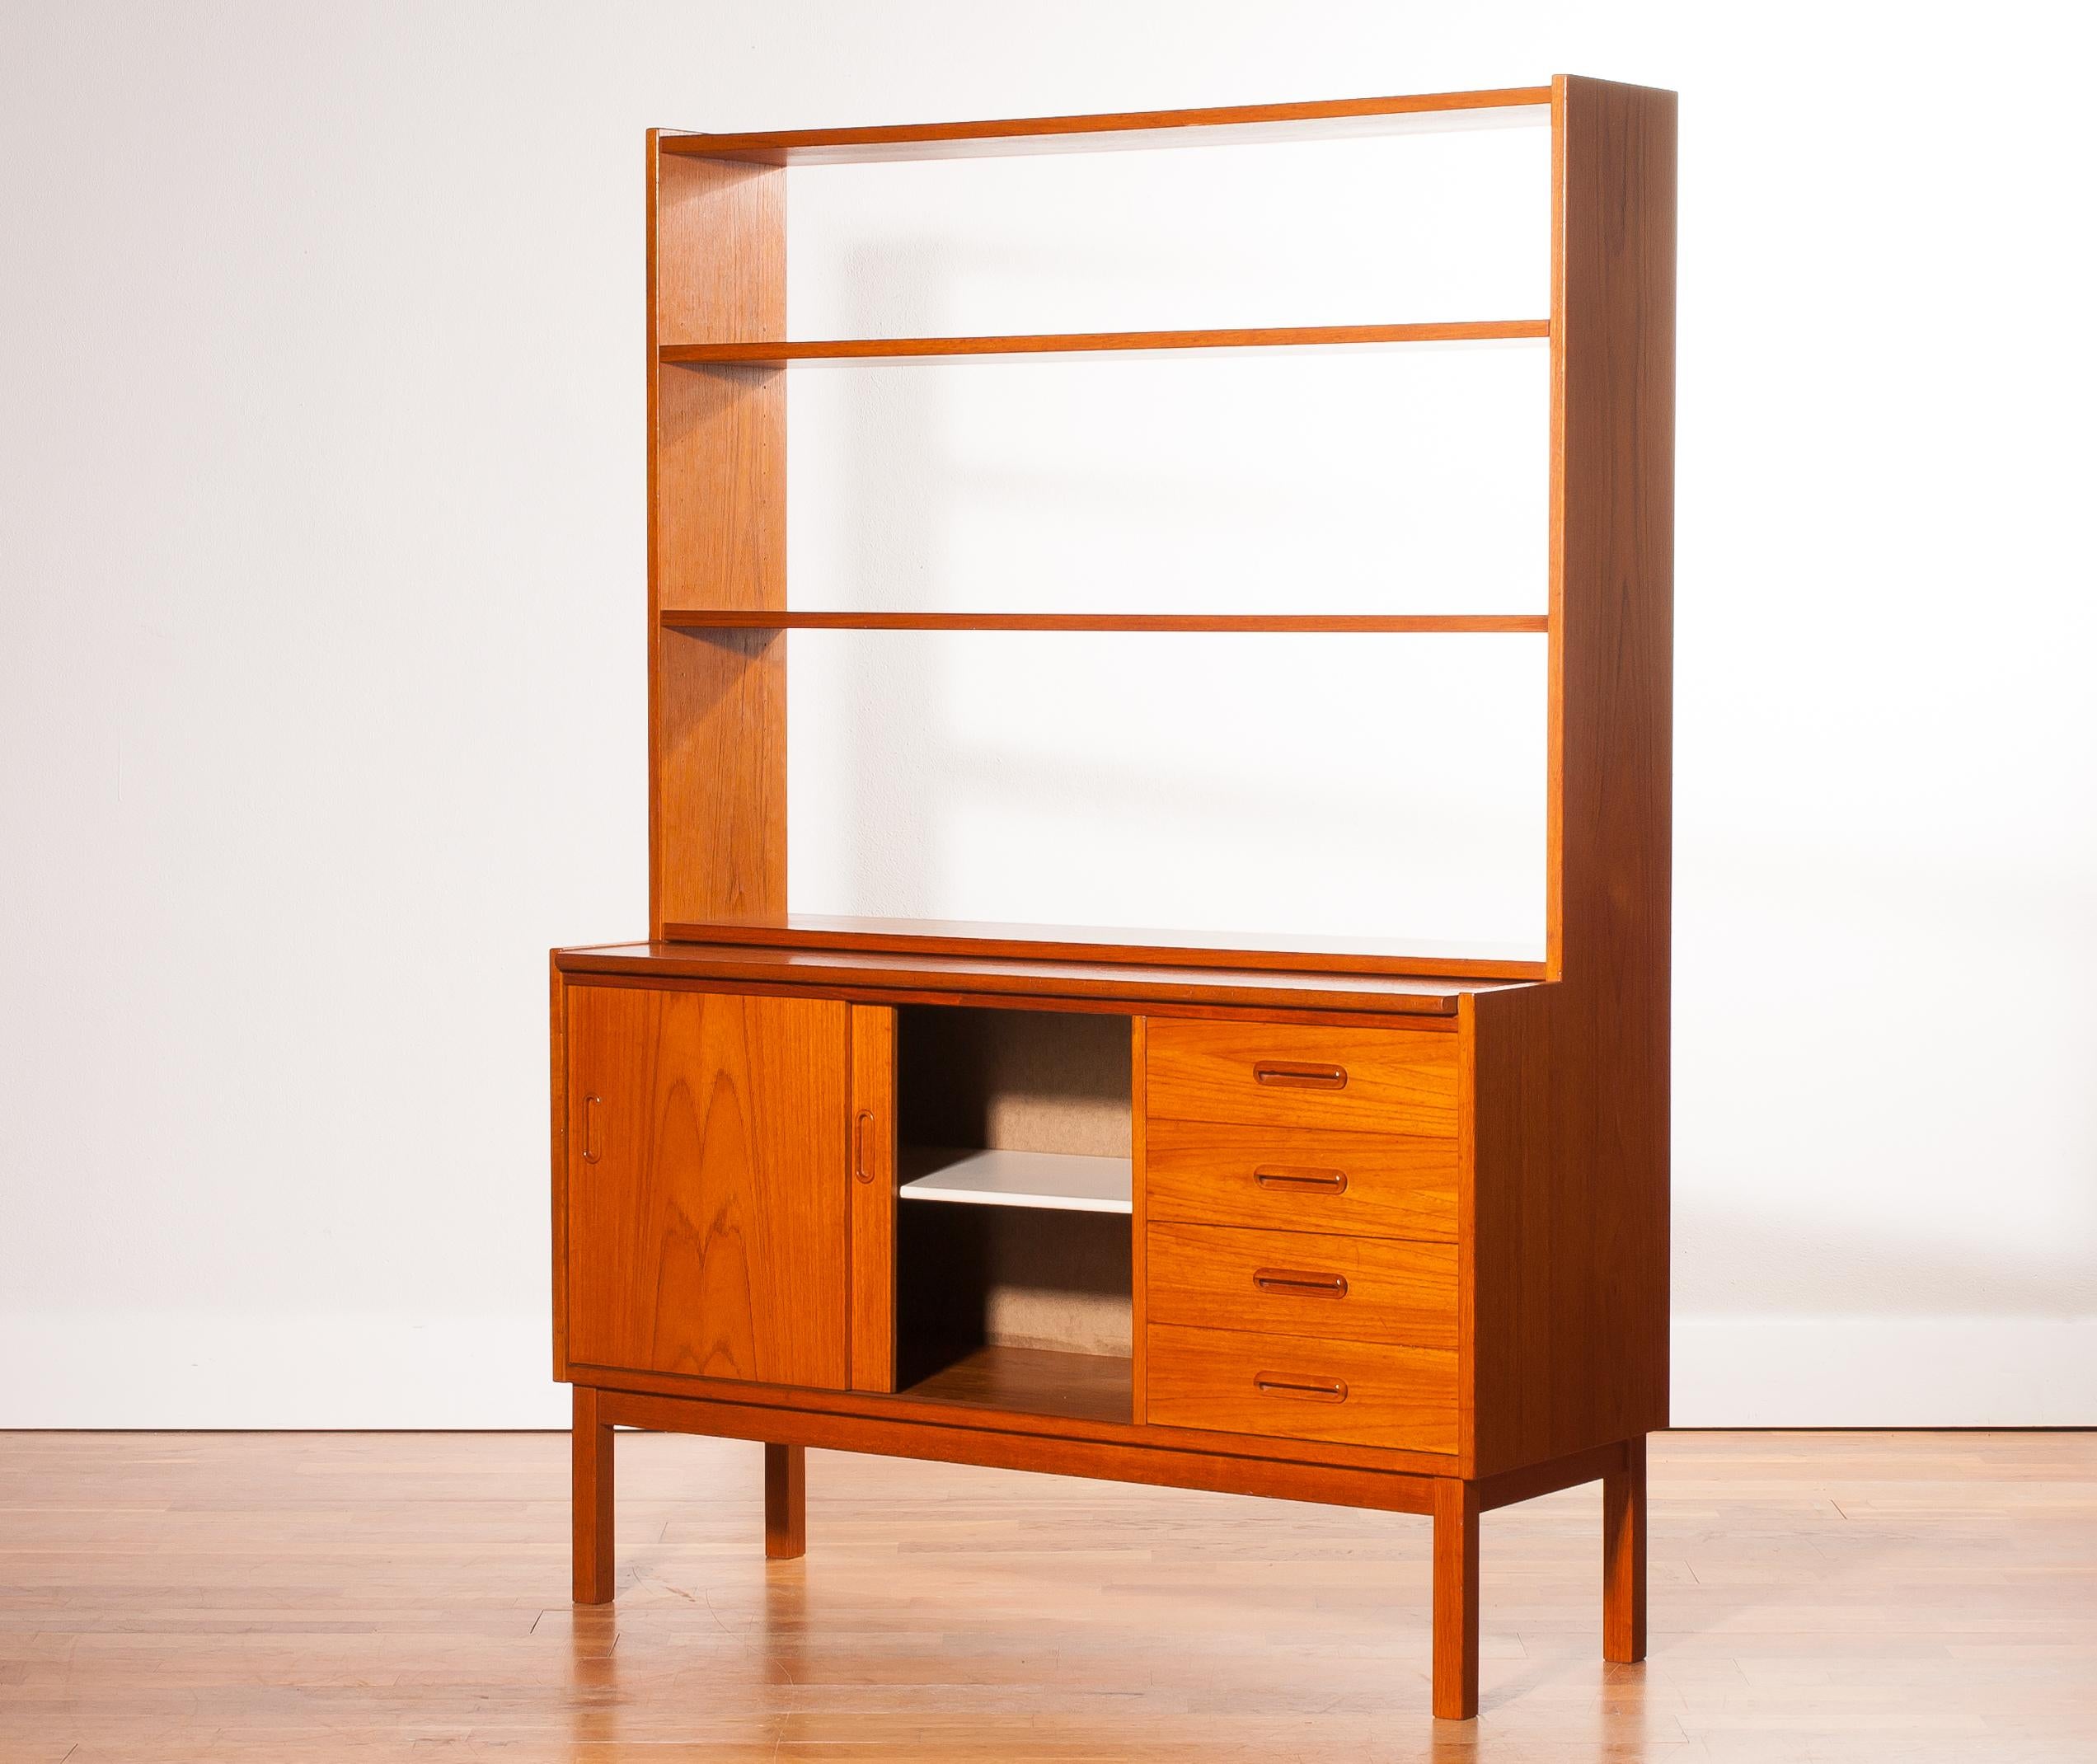 1960s, Teak Bookcase with Slidable Writing or Working Space from Sweden 1